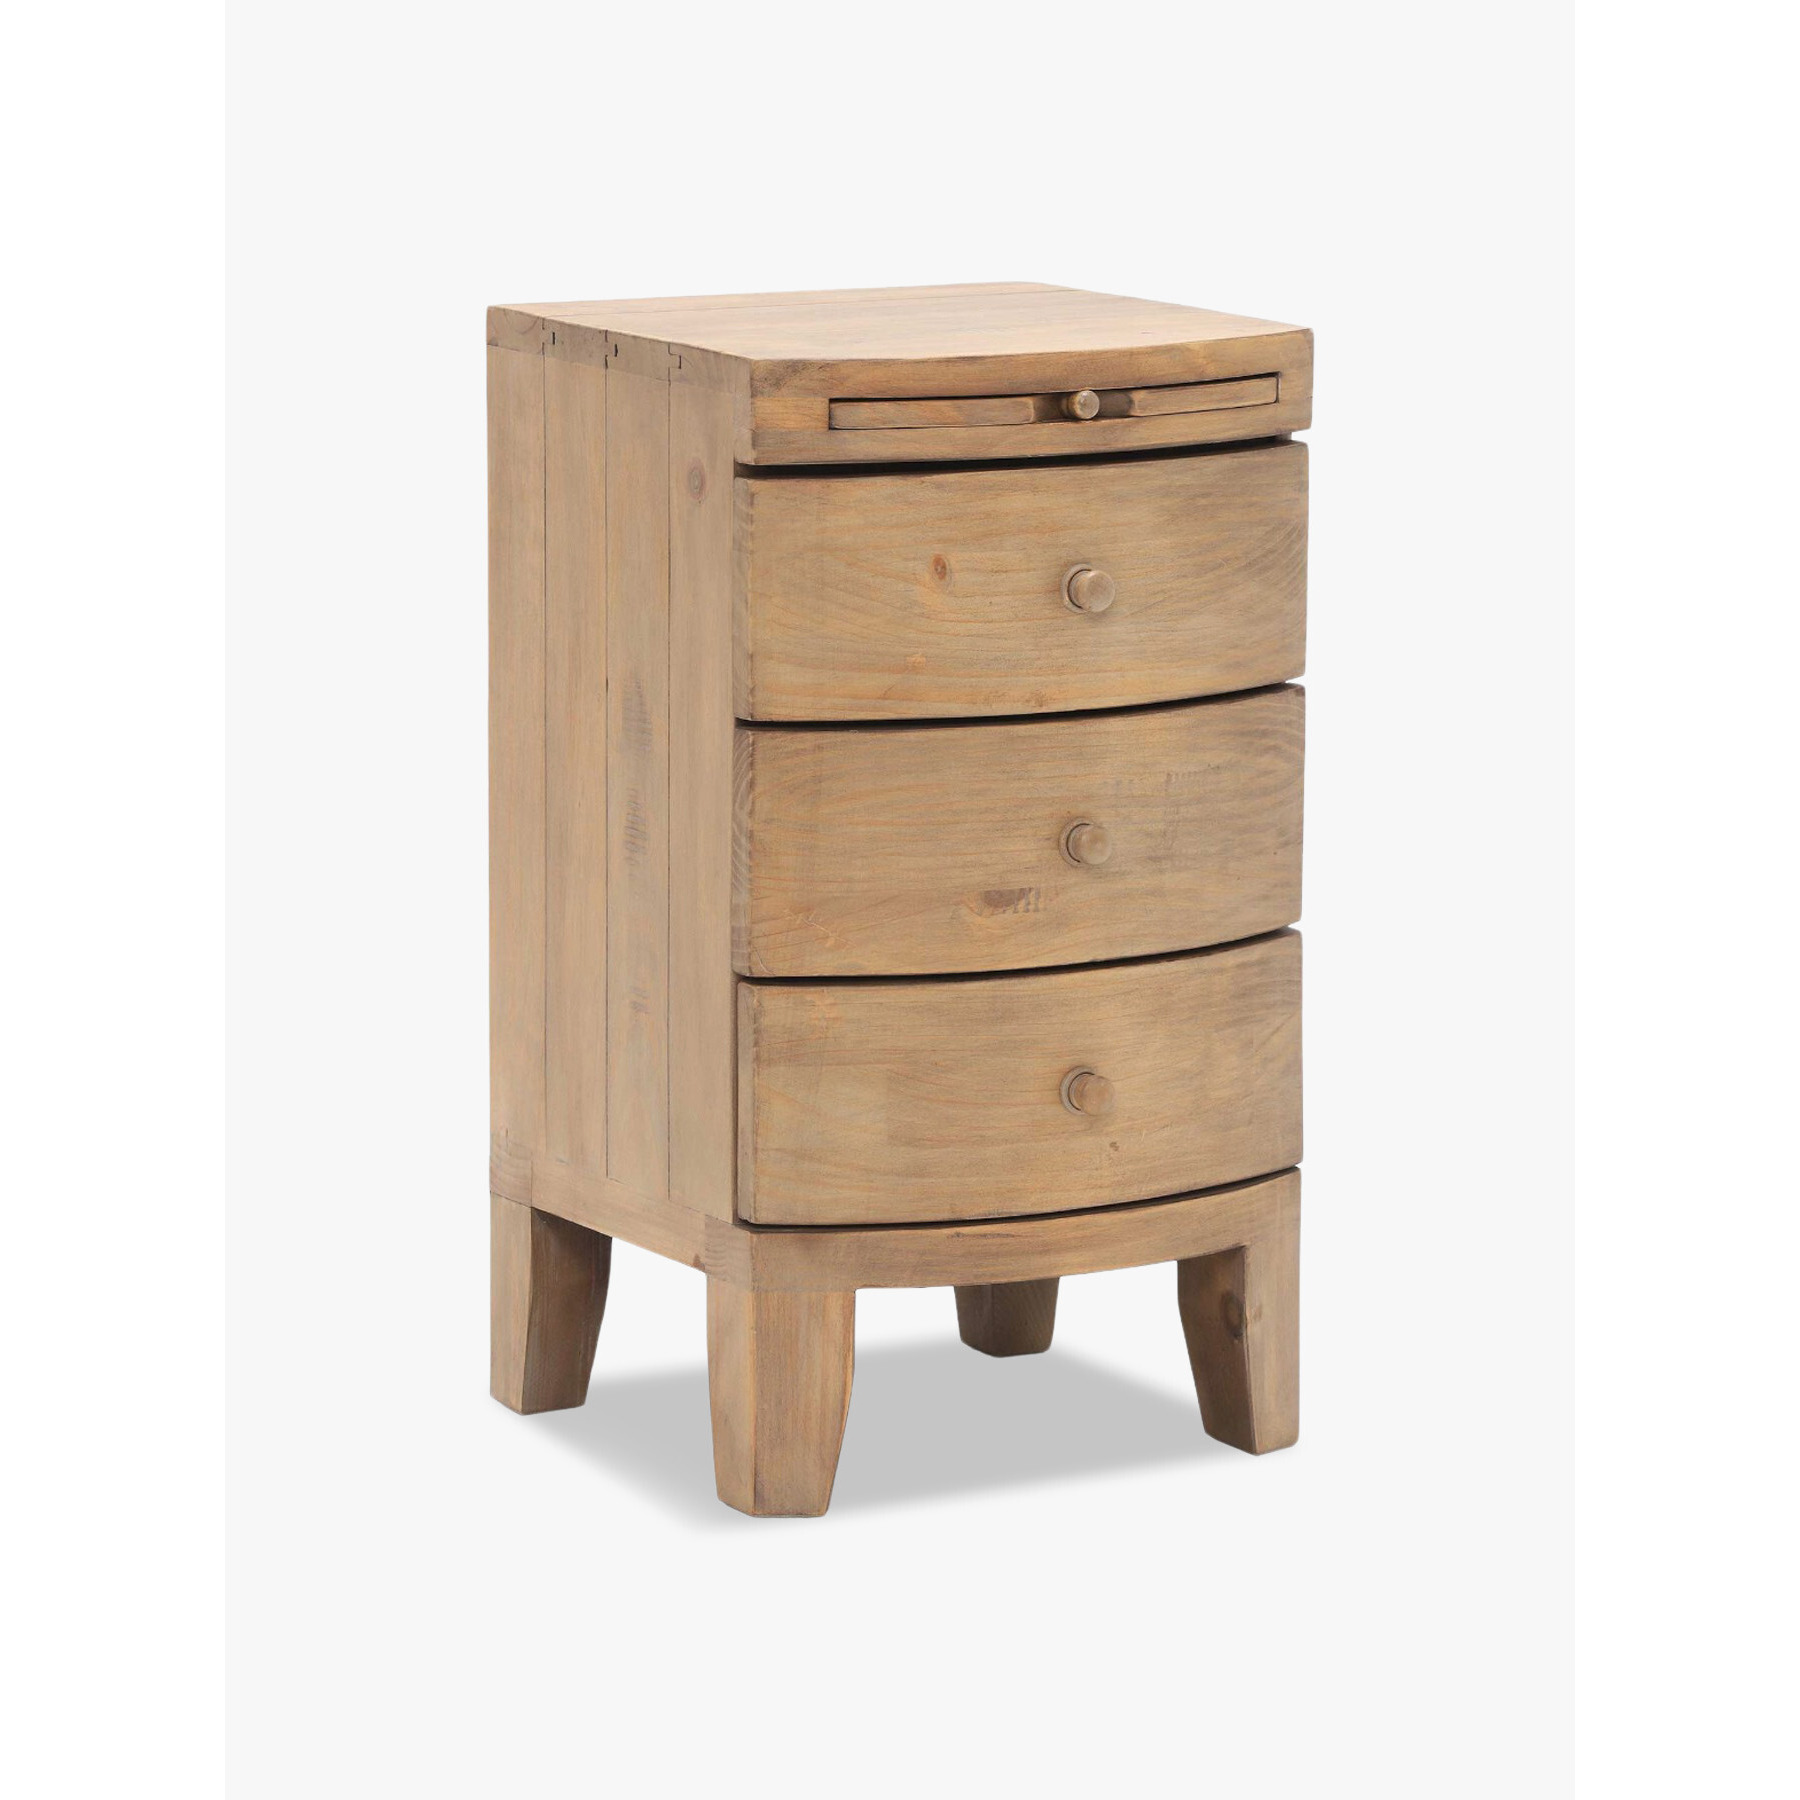 Barker and Stonehouse Lewes Reclaimed Wood 3 Drawer Bedside, Wheat Neutral - image 1